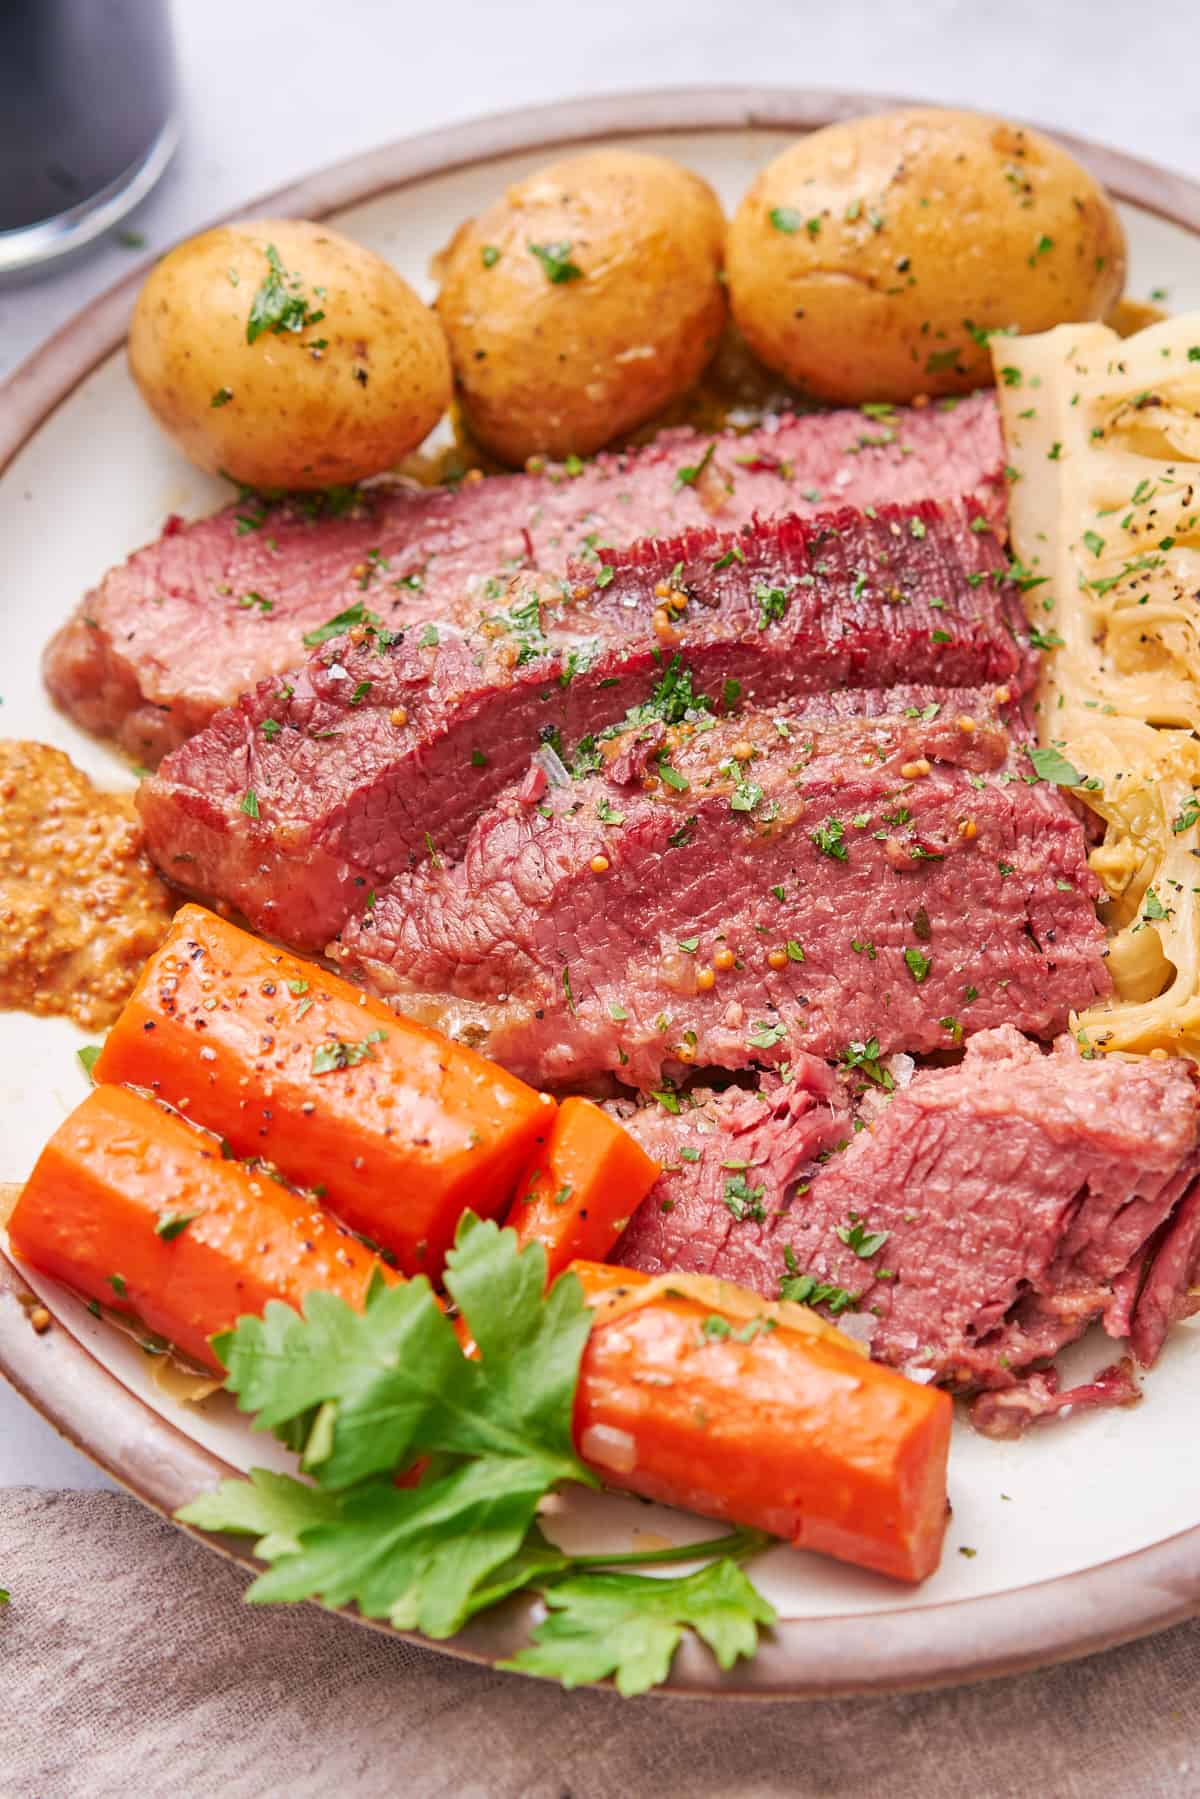 Corned beef slices on a plate with parsley, carrots, yellow potatoes, and cabbage. 